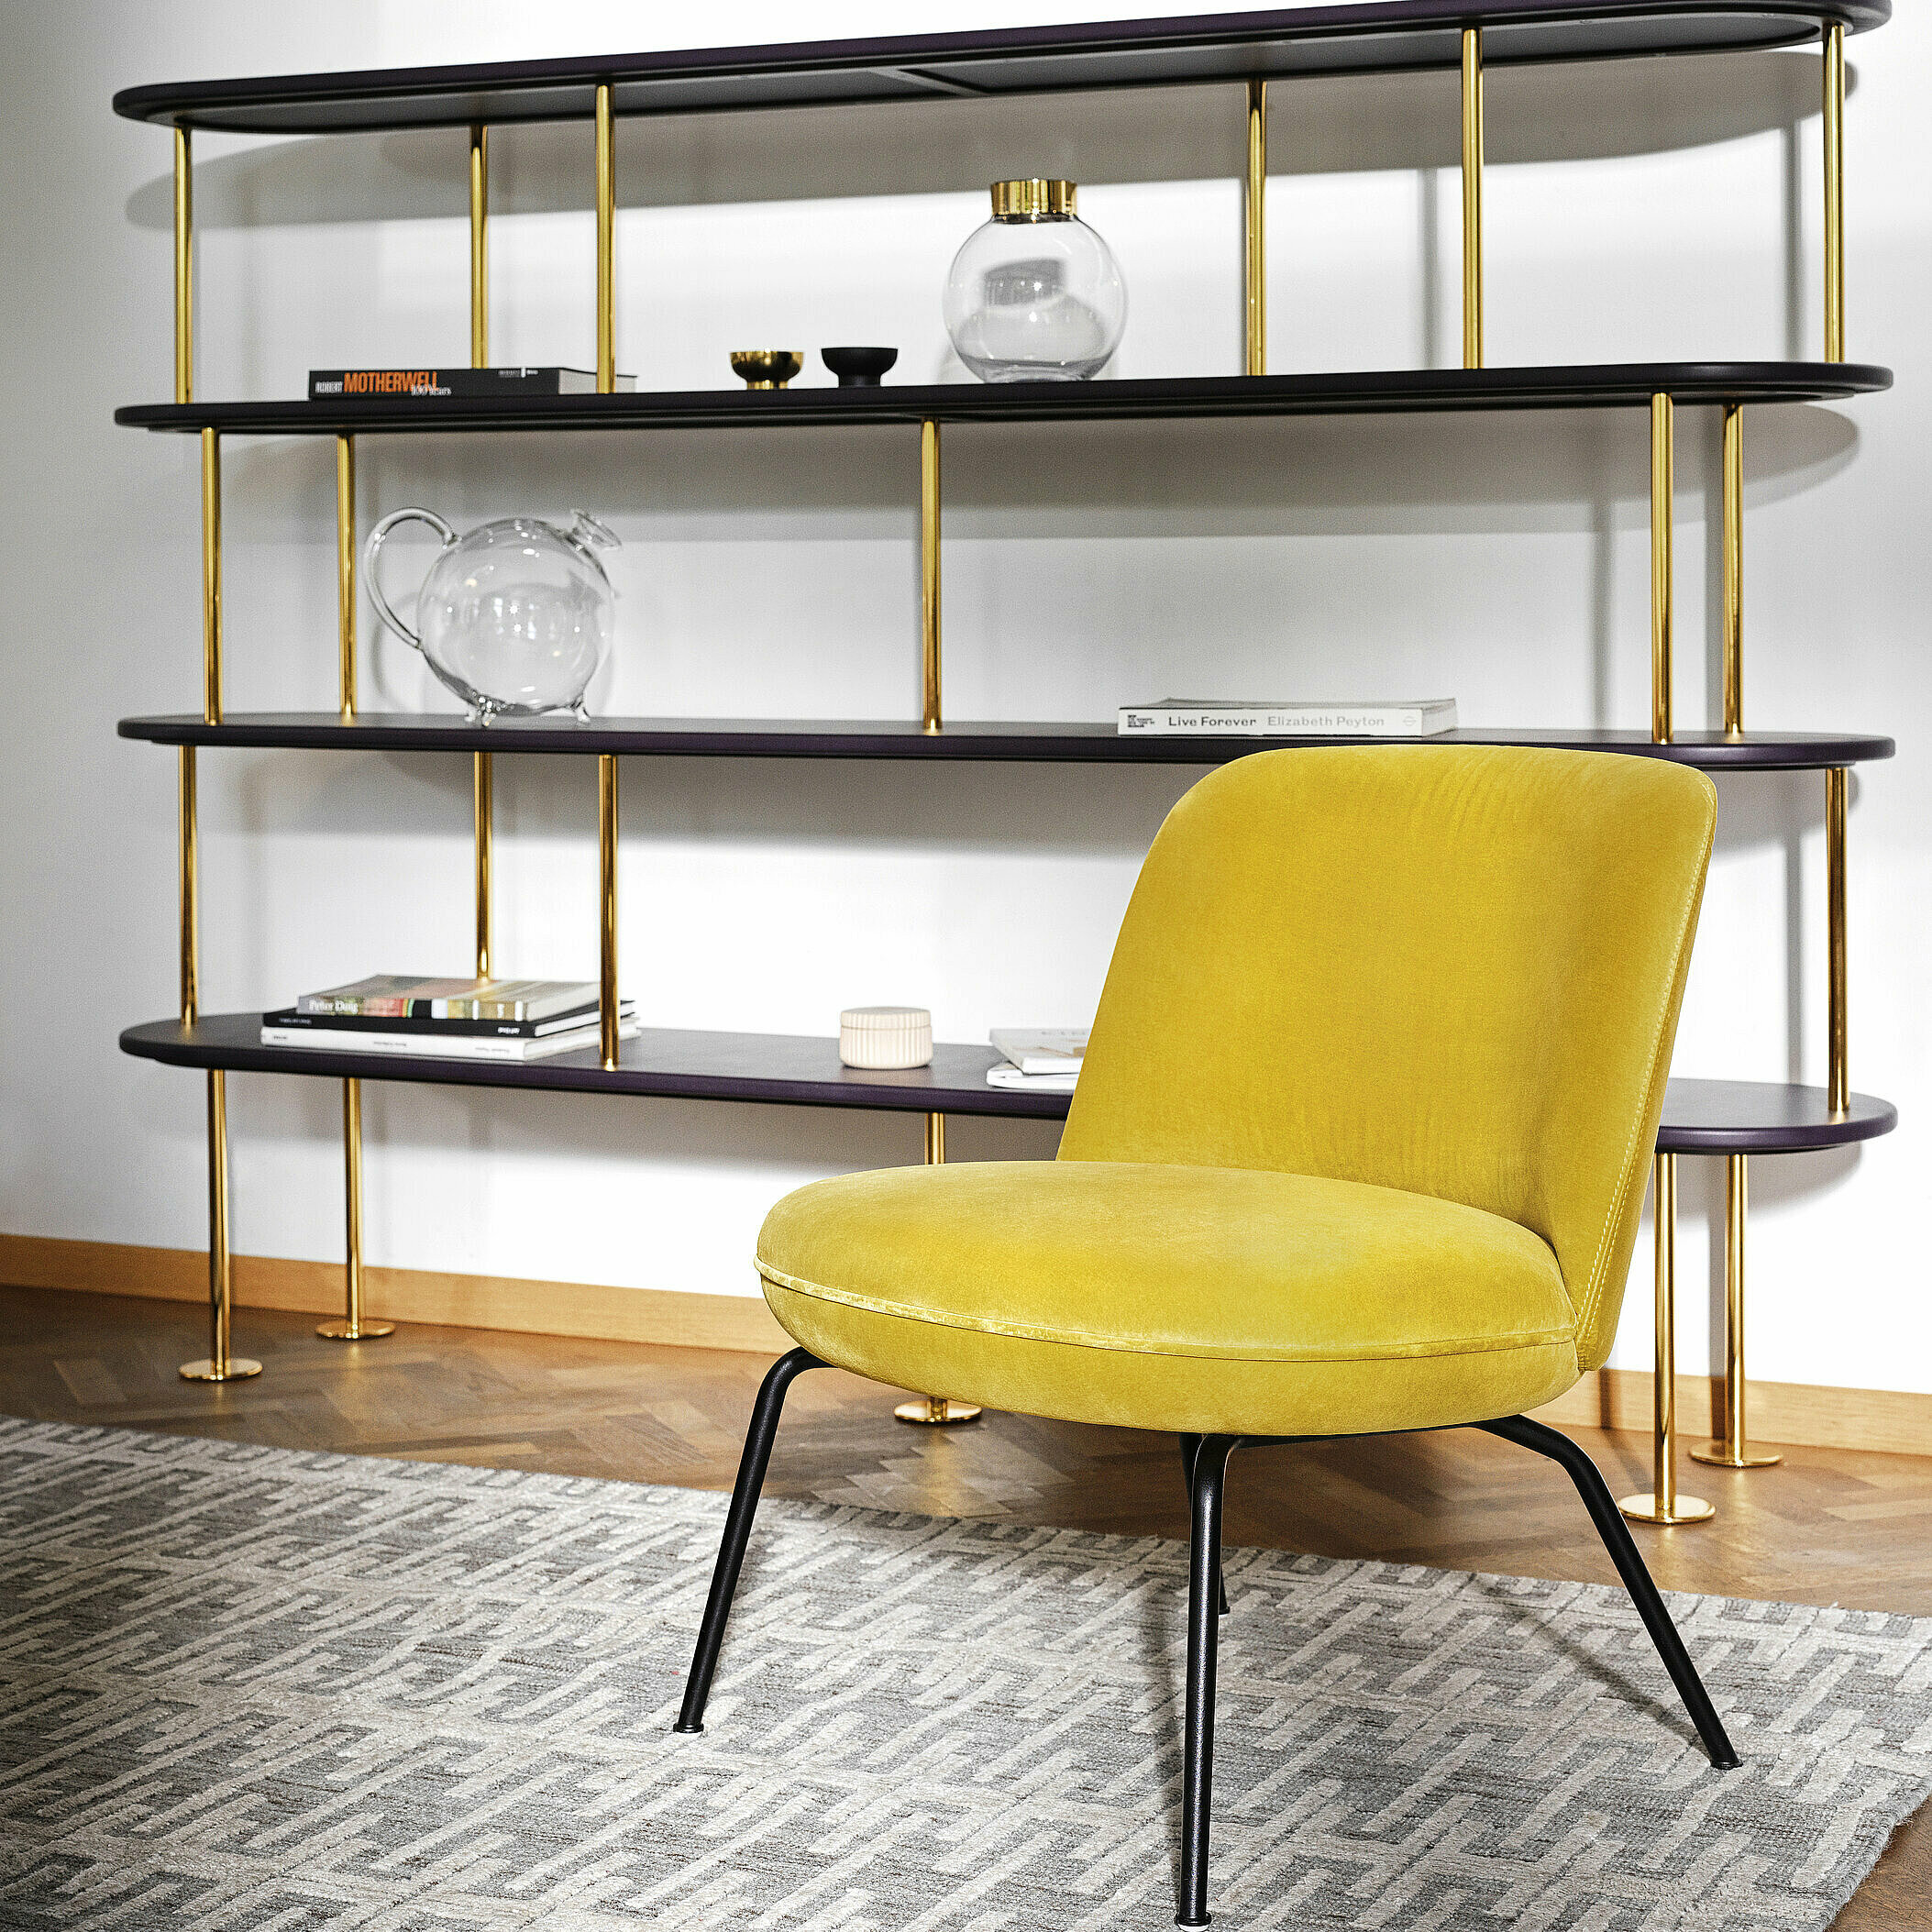 Merwyn Lounge Chair in velvet gold in front of MD Shelf with golden parts